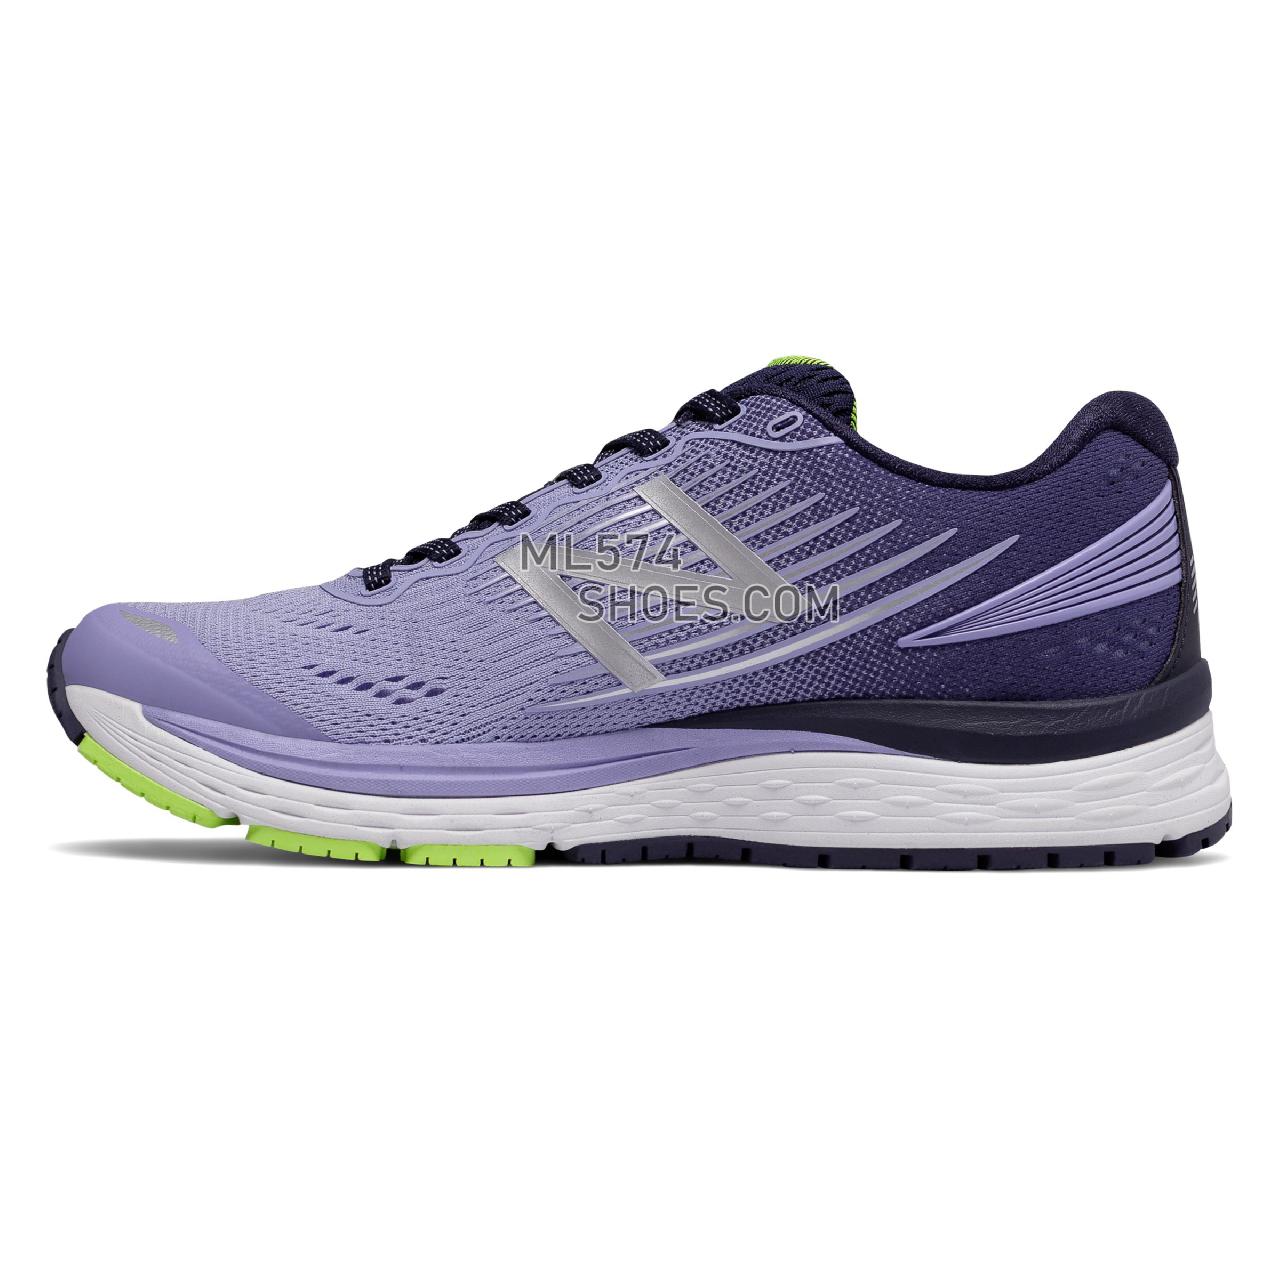 New Balance 880v8 - Women's 880 - Running Blue Iris with Pigment and Solar Yellow - W880BY8